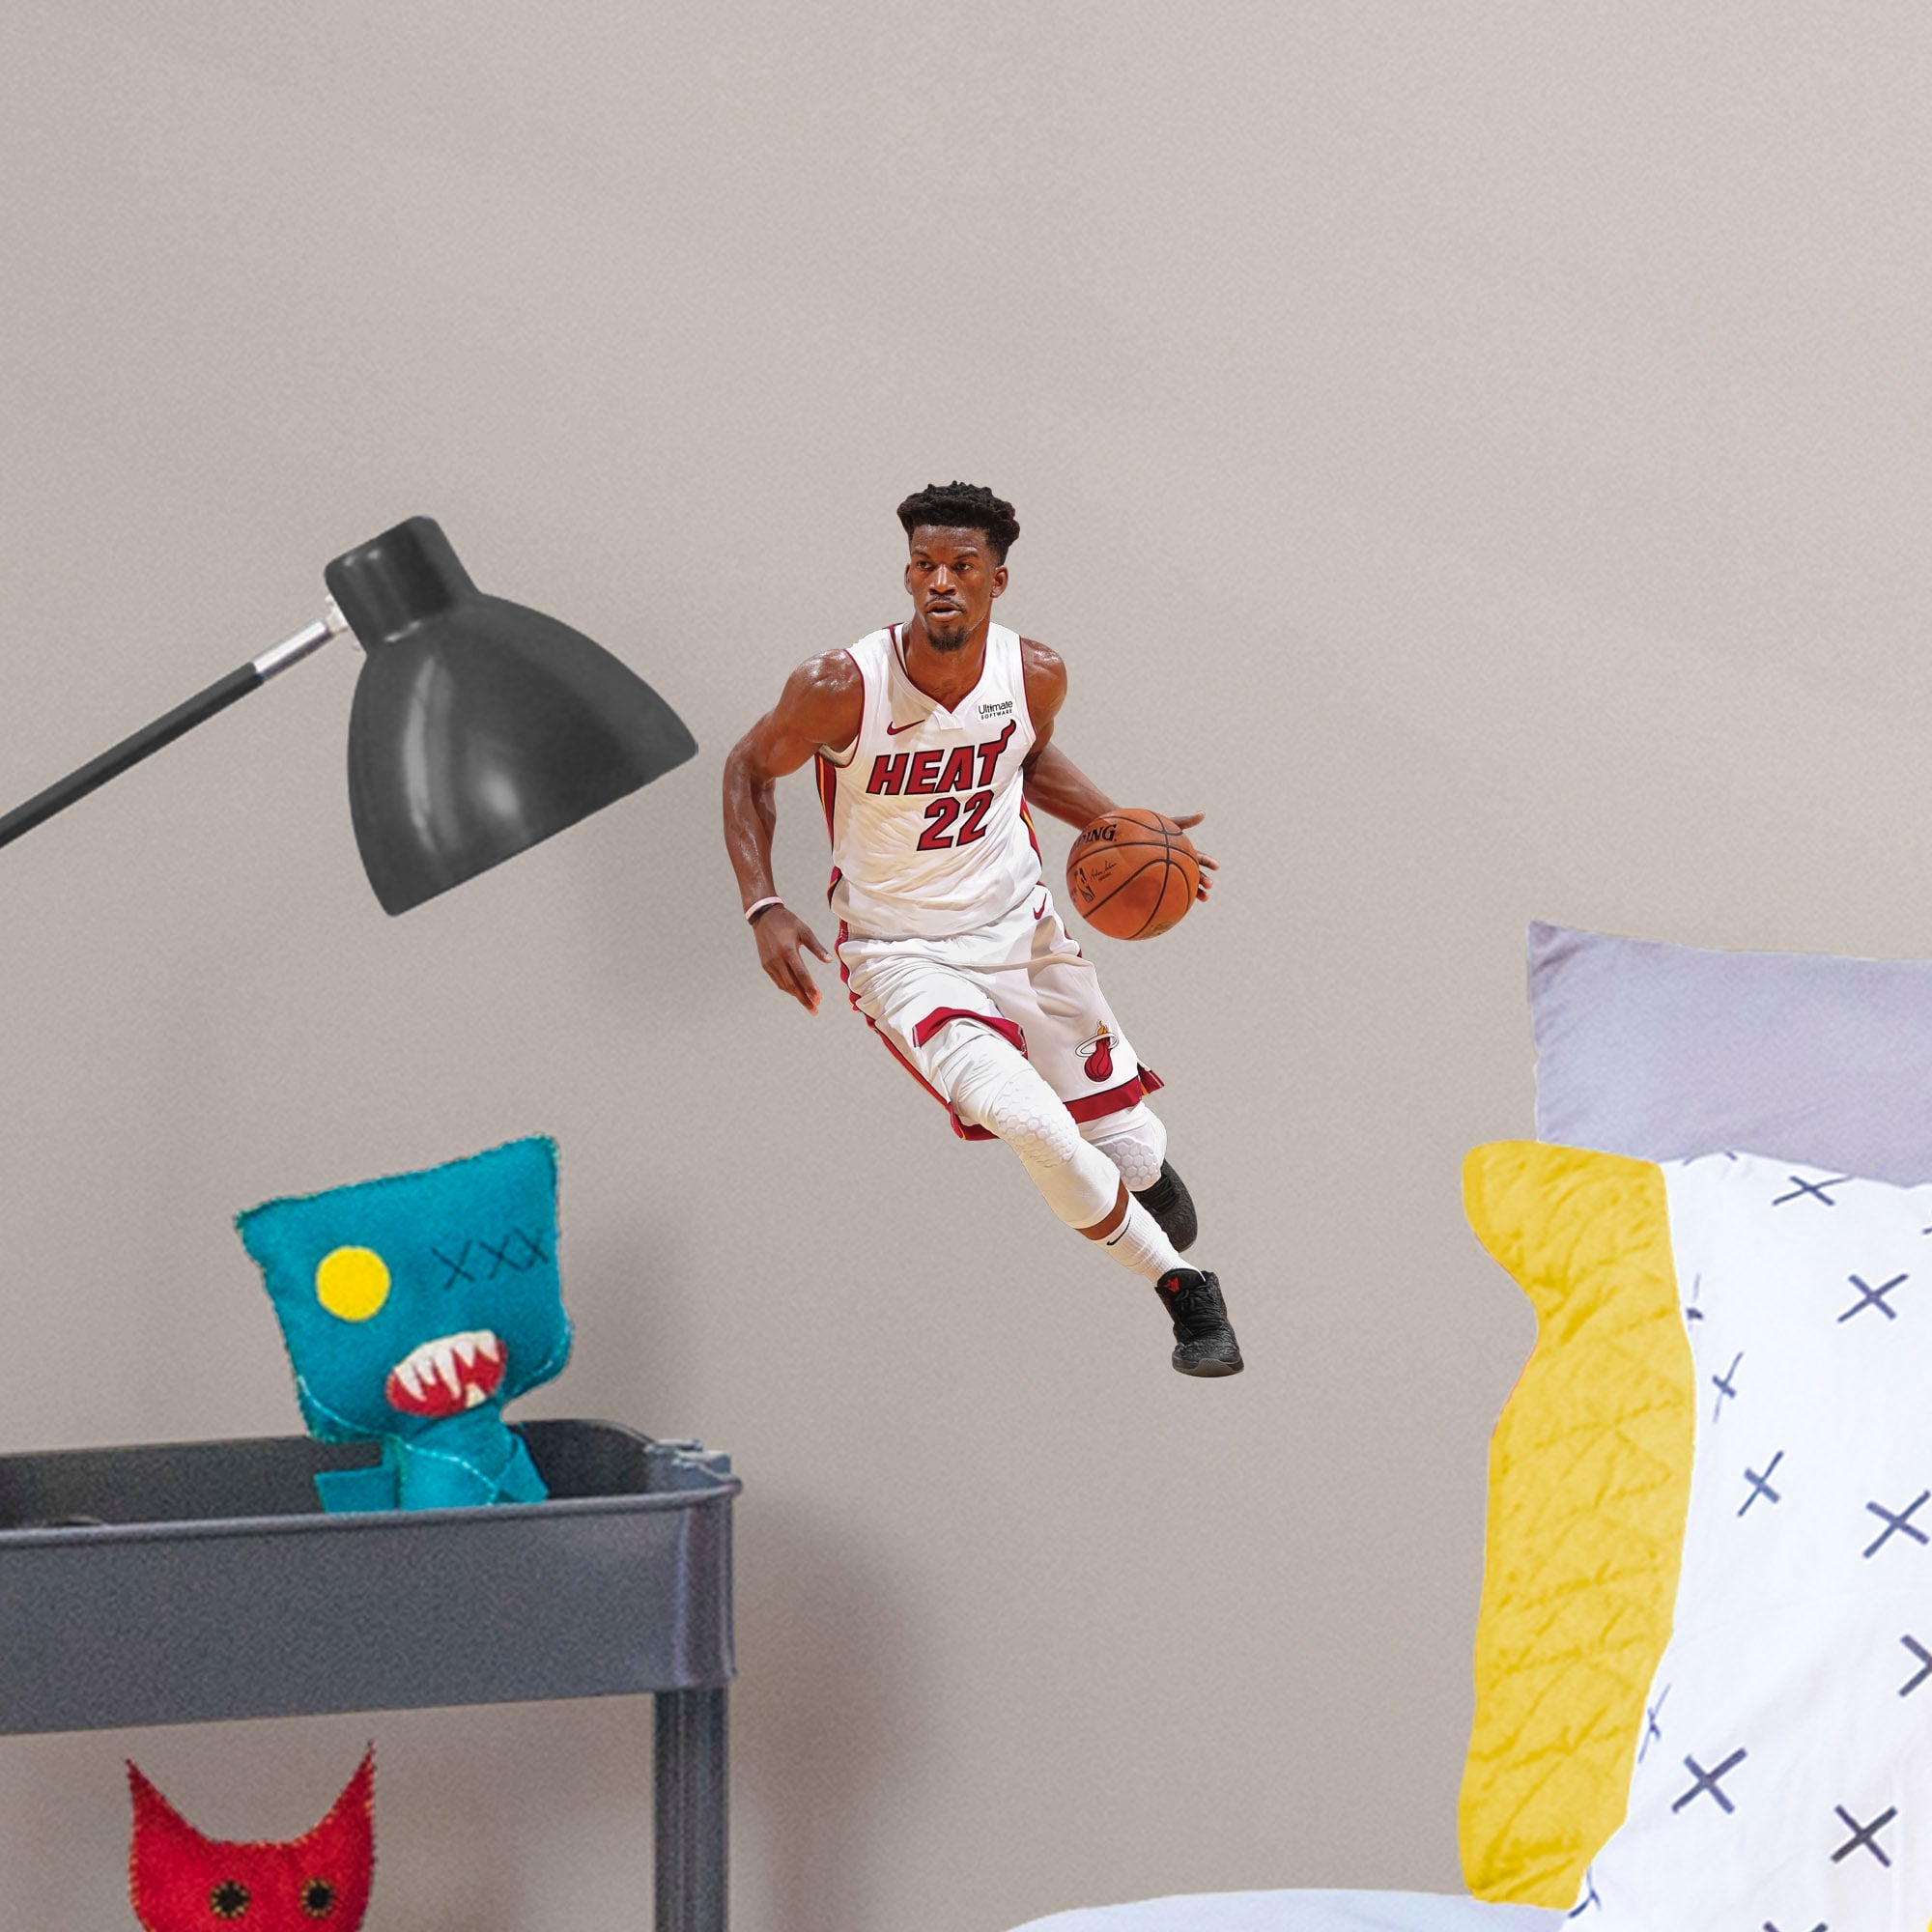 Jimmy Butler for Miami Heat - Officially Licensed NBA Removable Wall Decal Large by Fathead | Vinyl